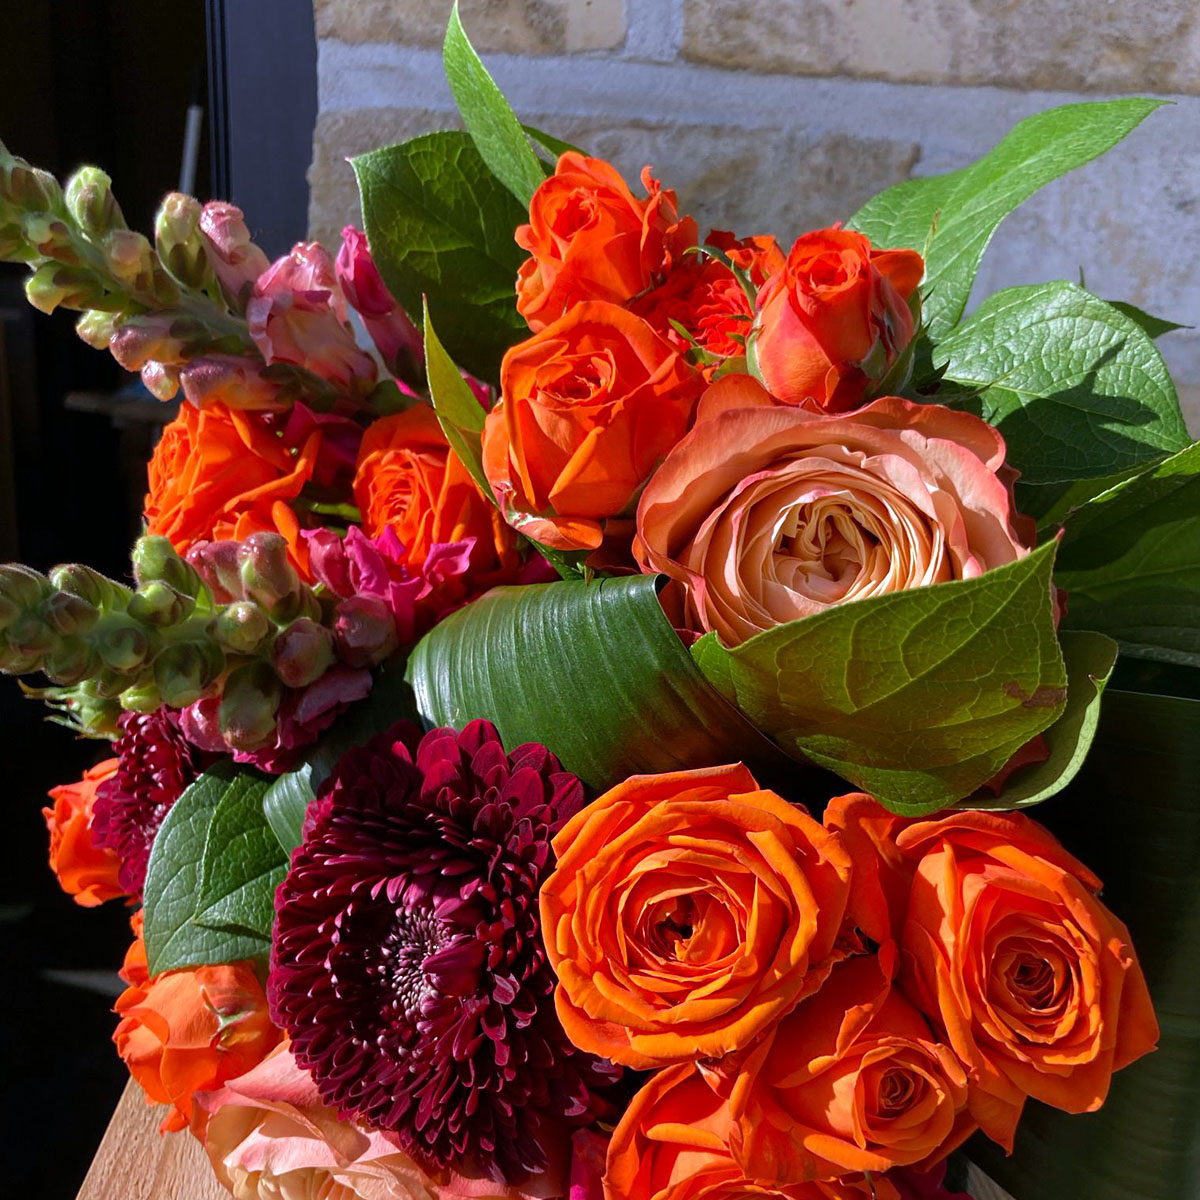 Orange roses and salal bouquet by Floregineel on Thursd